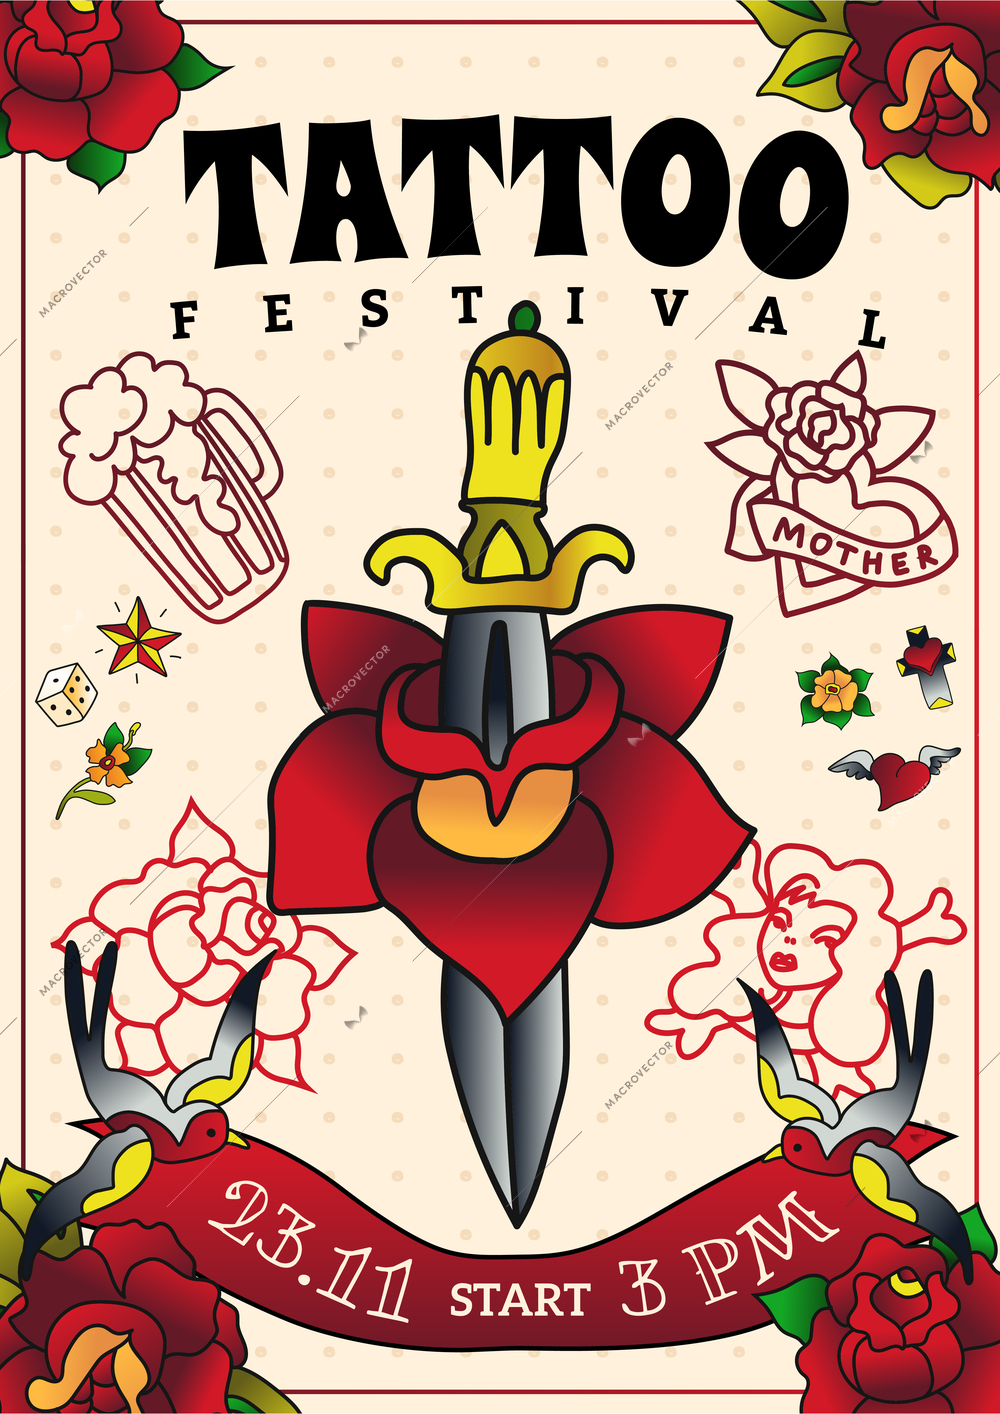 Tattoo festival poster with event date end traditional symbols of classic old tattoo school vector illustration